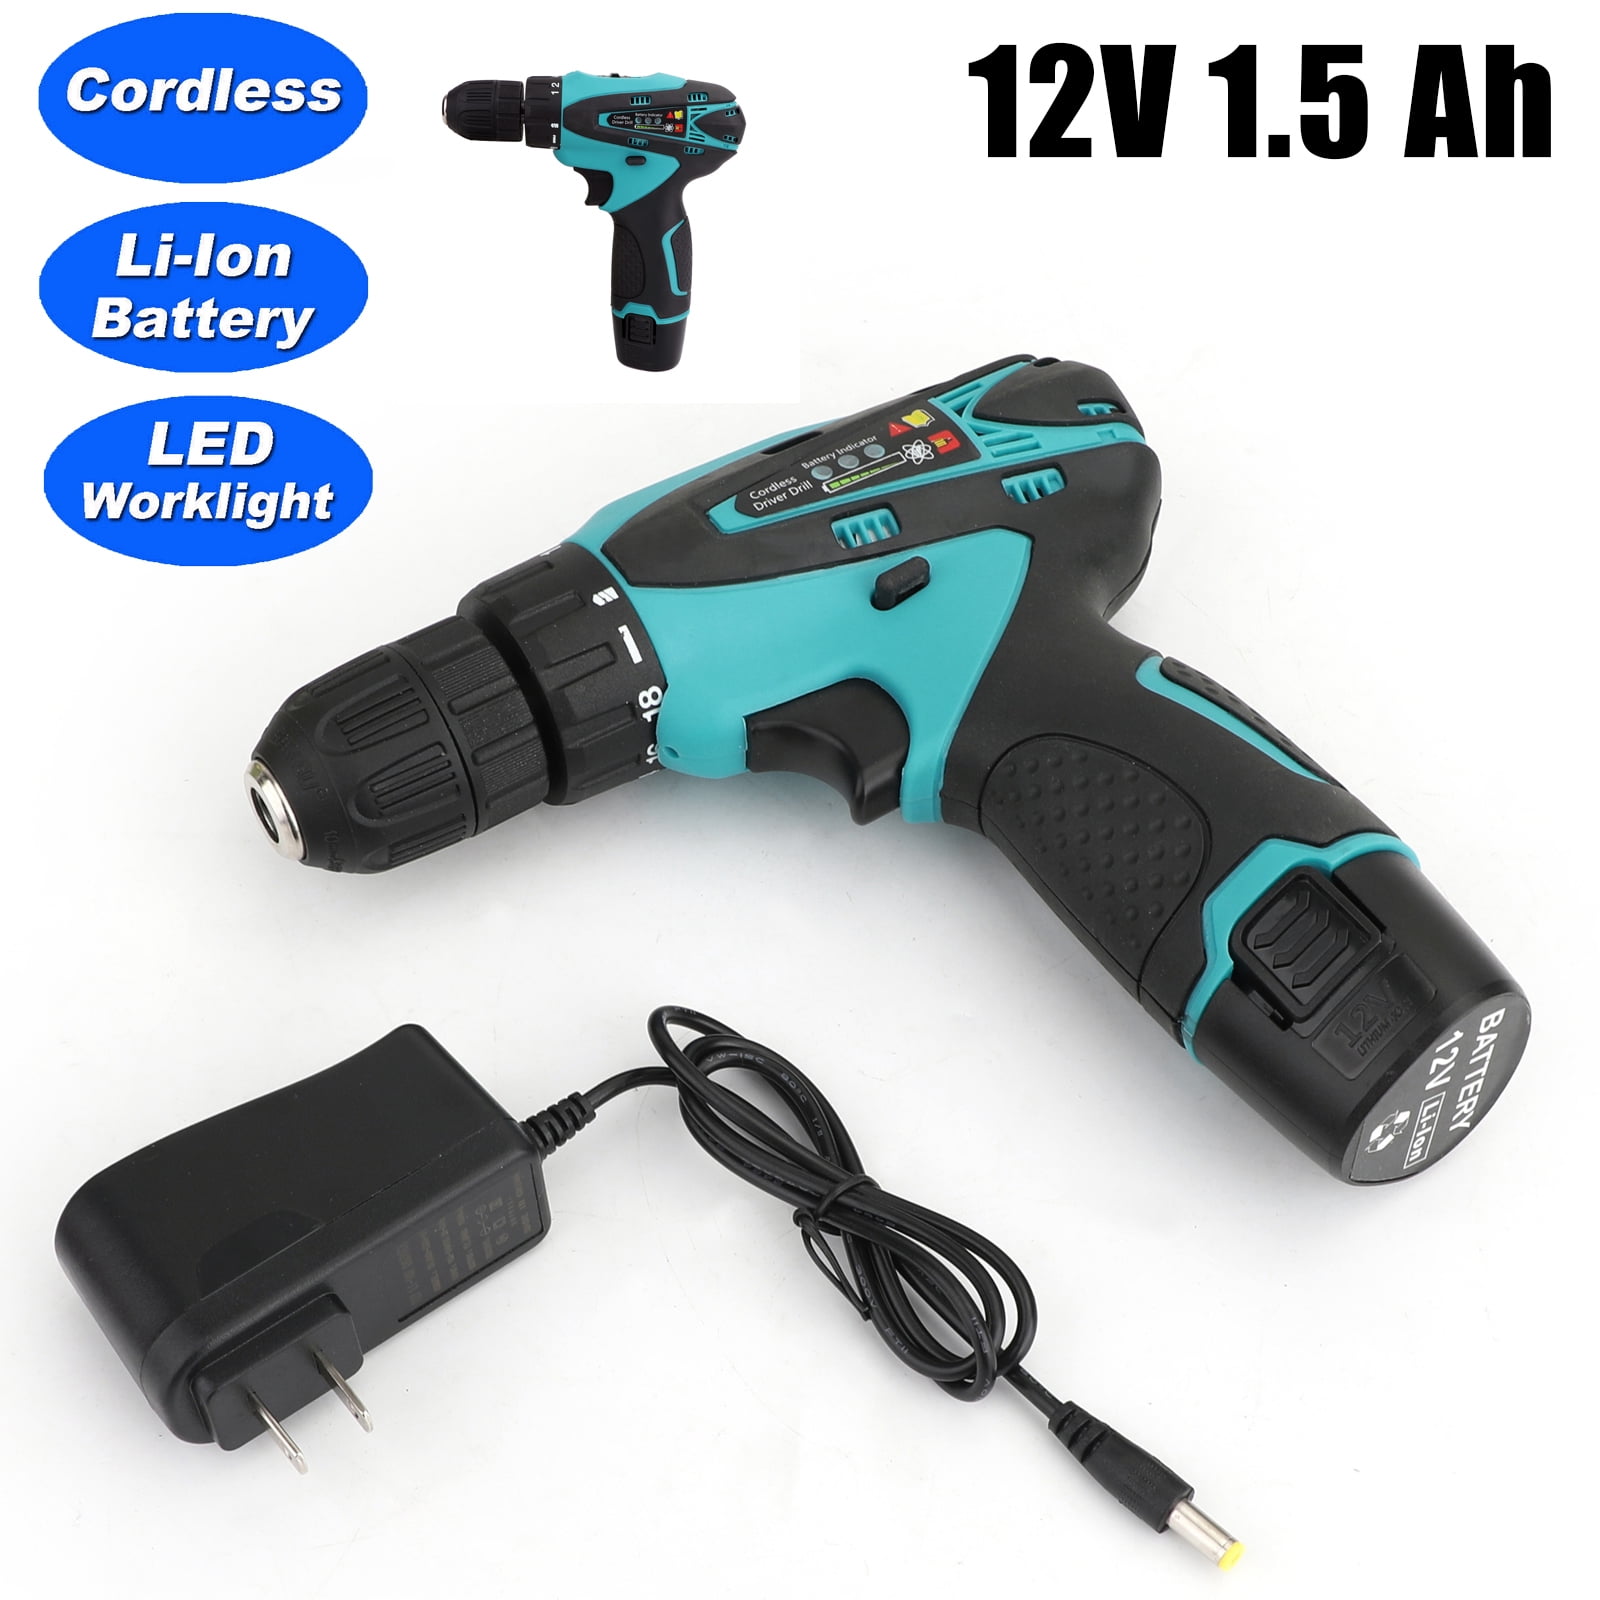 Mini Drill 12V 32N.m 2-Speed Electric Lithium-Ion Battery Cordless Drill